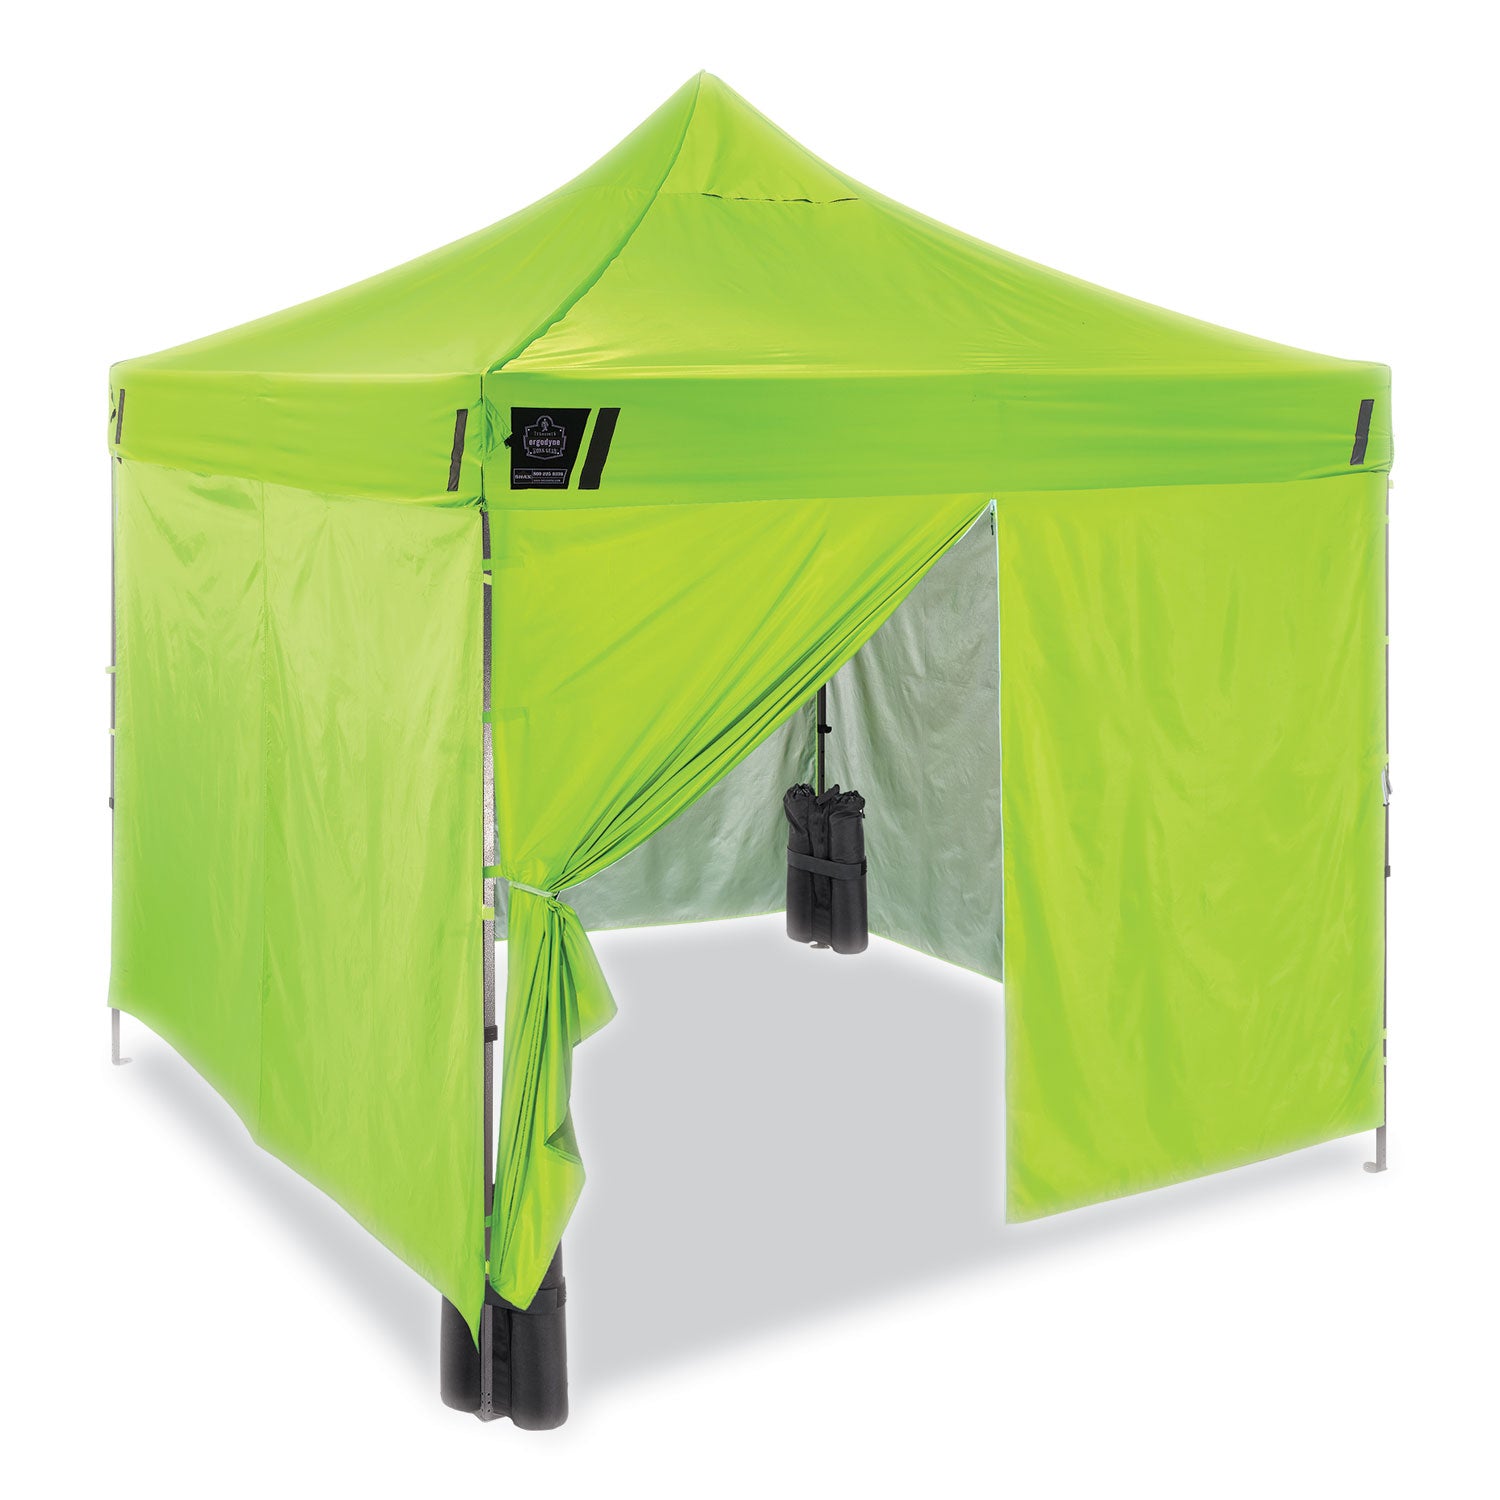 shax-6053-enclosed-pop-up-tent-kit-single-skin-10-ft-x-10-ft-polyester-steel-lime-ships-in-1-3-business-days_ego12976 - 1